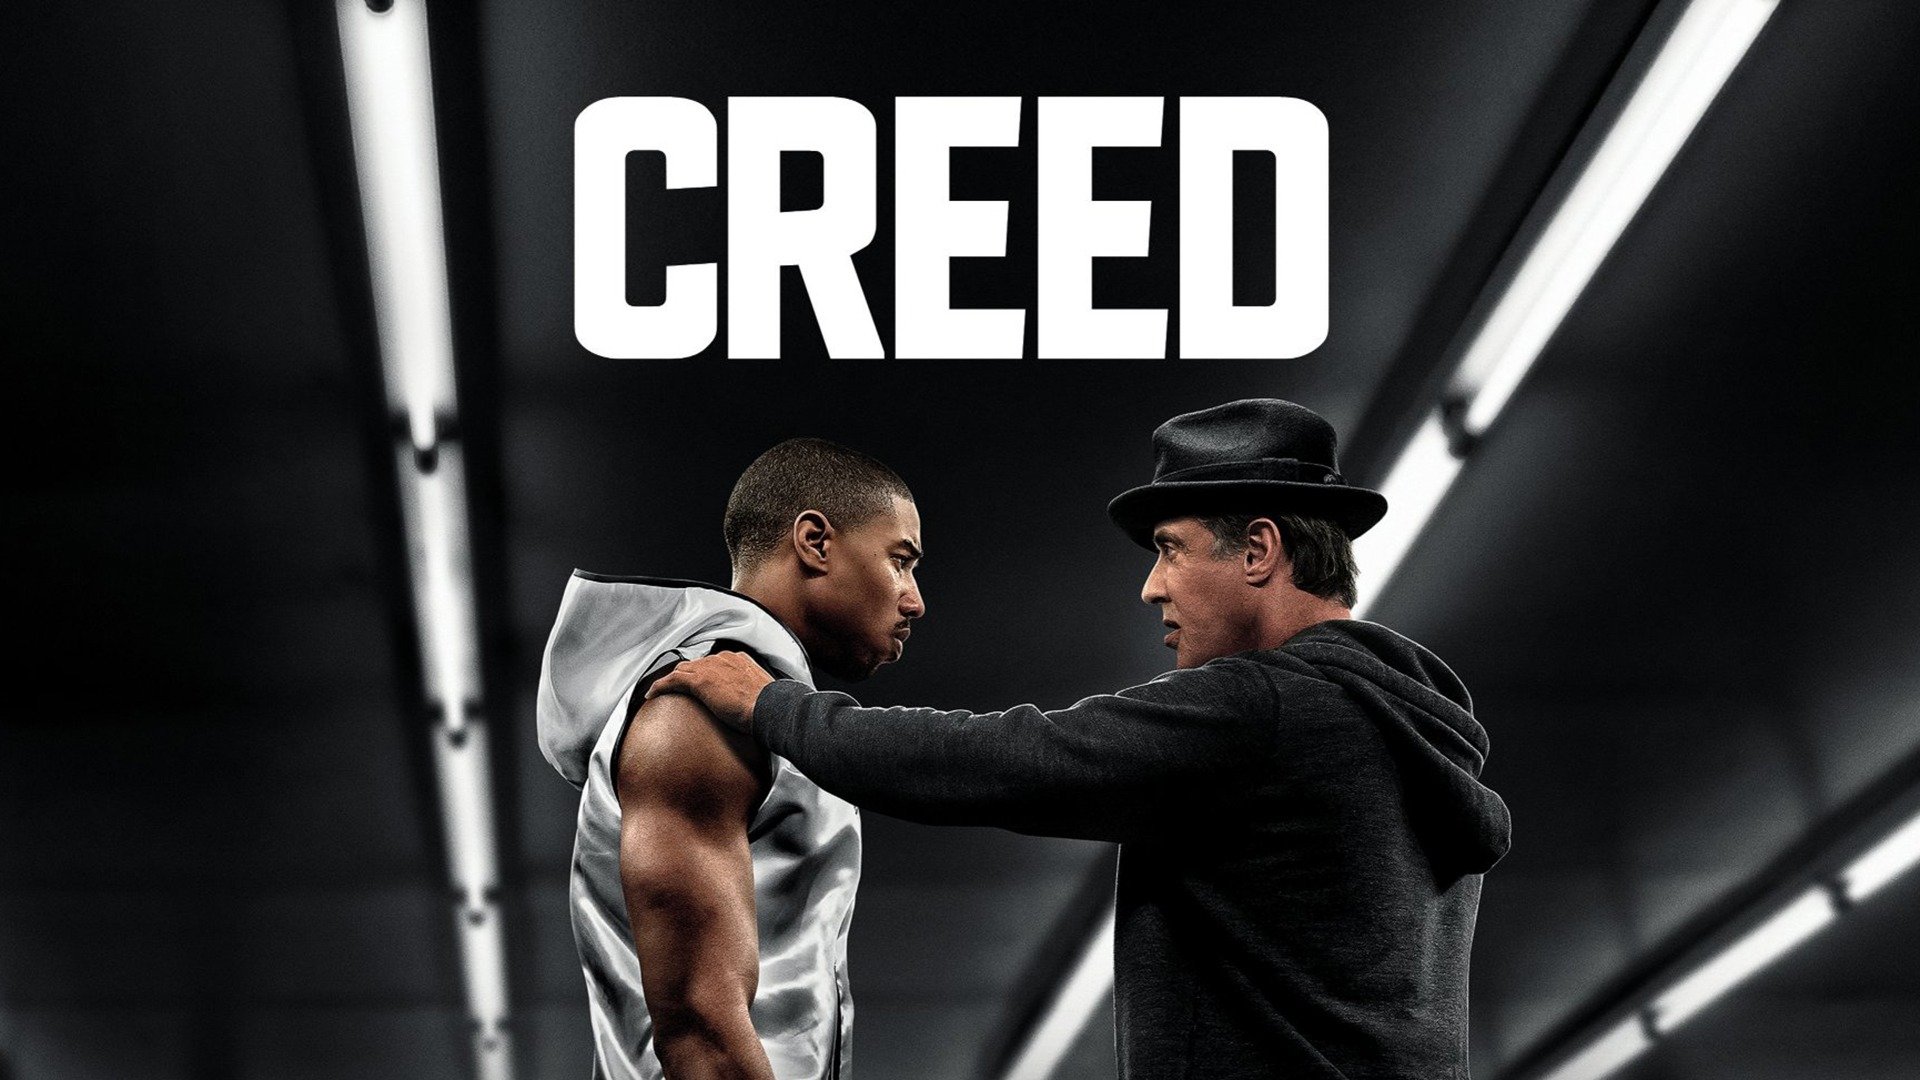 WATCH.] Creed III (2023) FullMovie Free Online English Subbed - Collection  | OpenSea